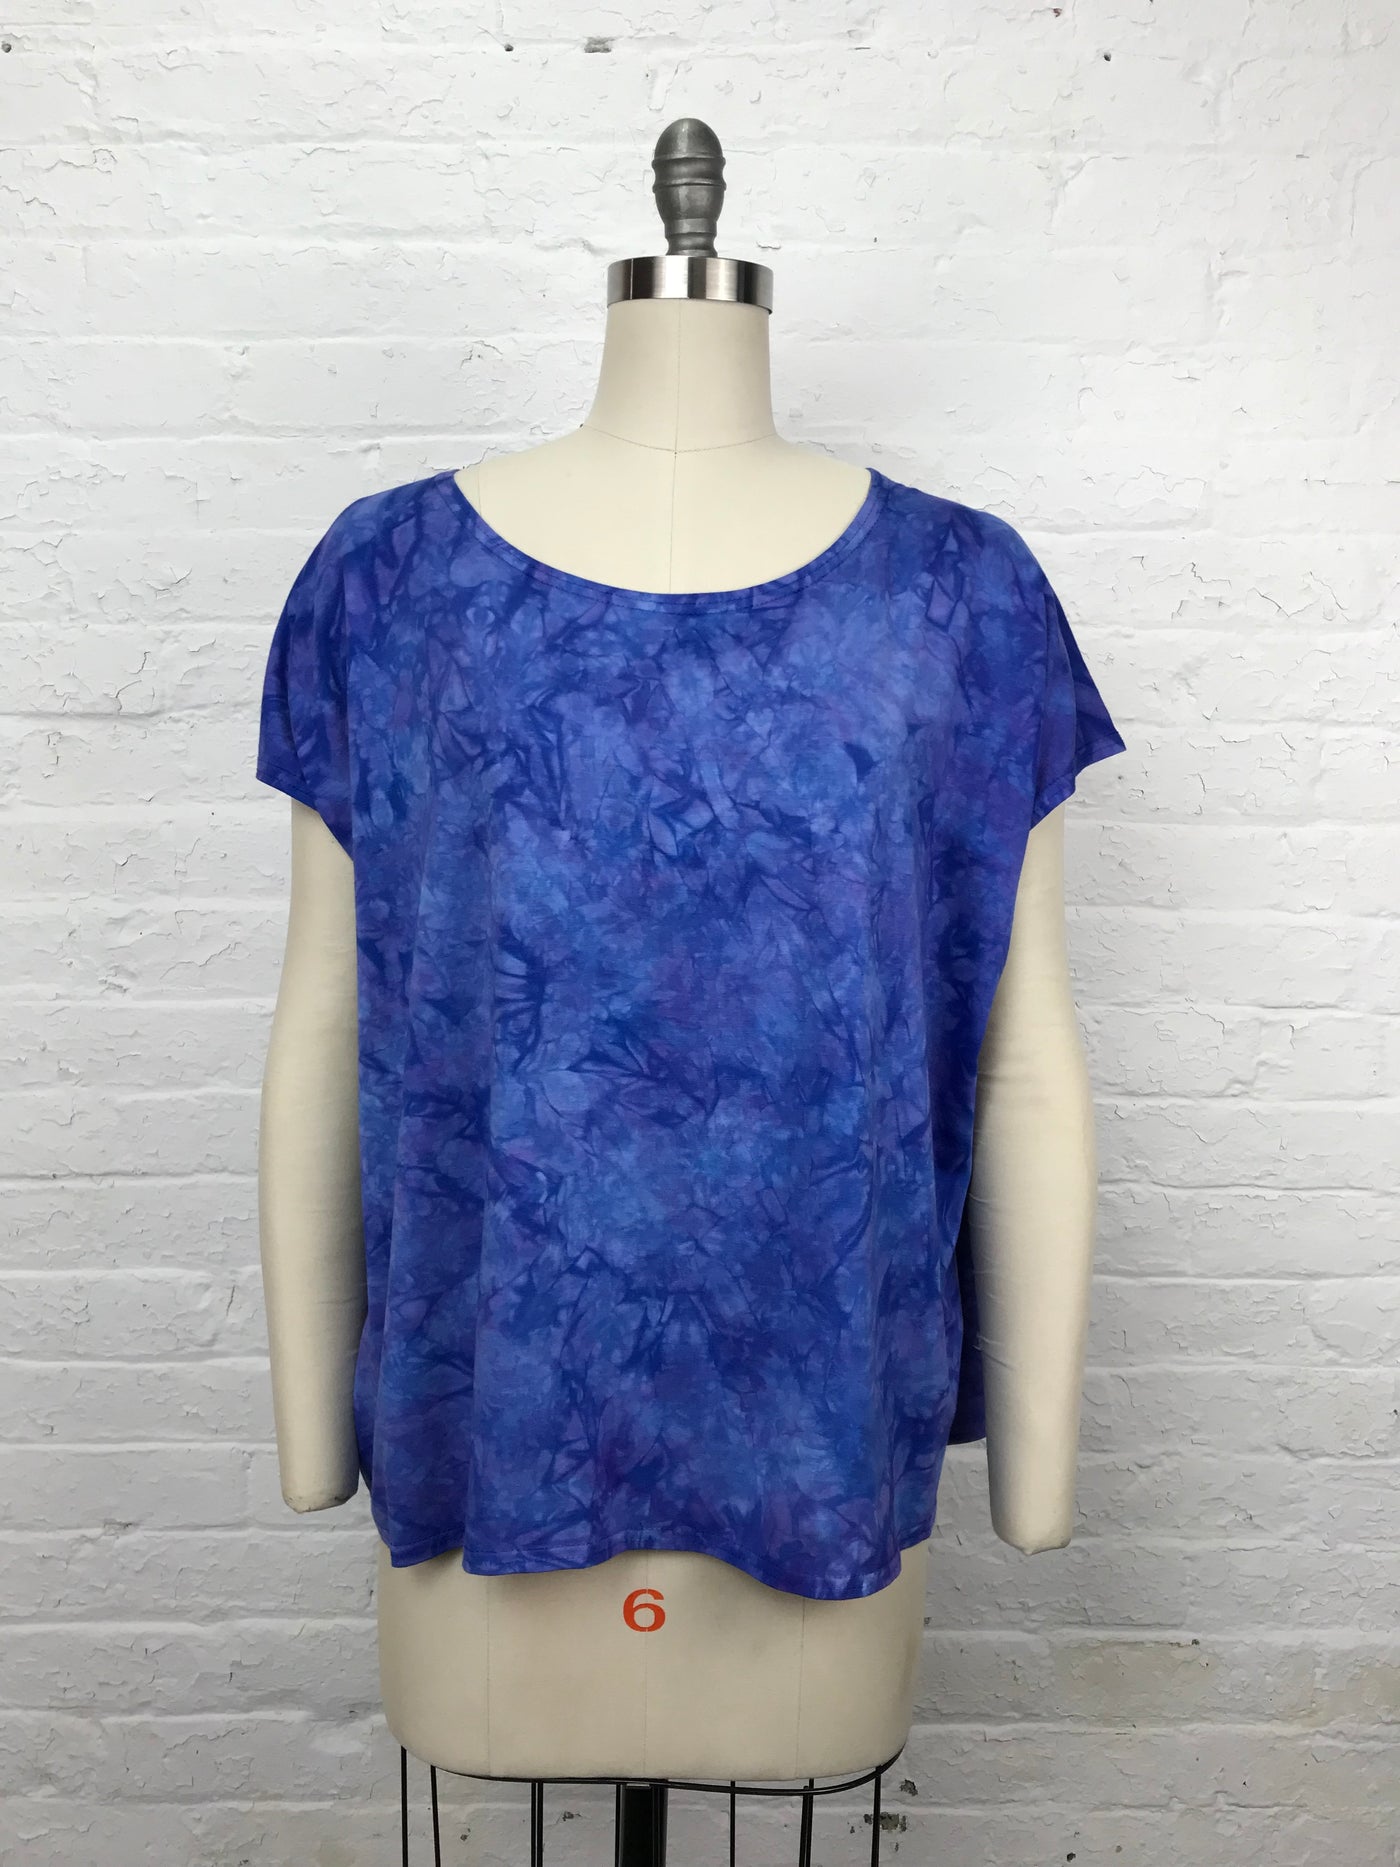 Loose Fitting Oversized Hand Dyed Elsie Top in Morning Glory Variegated - front view